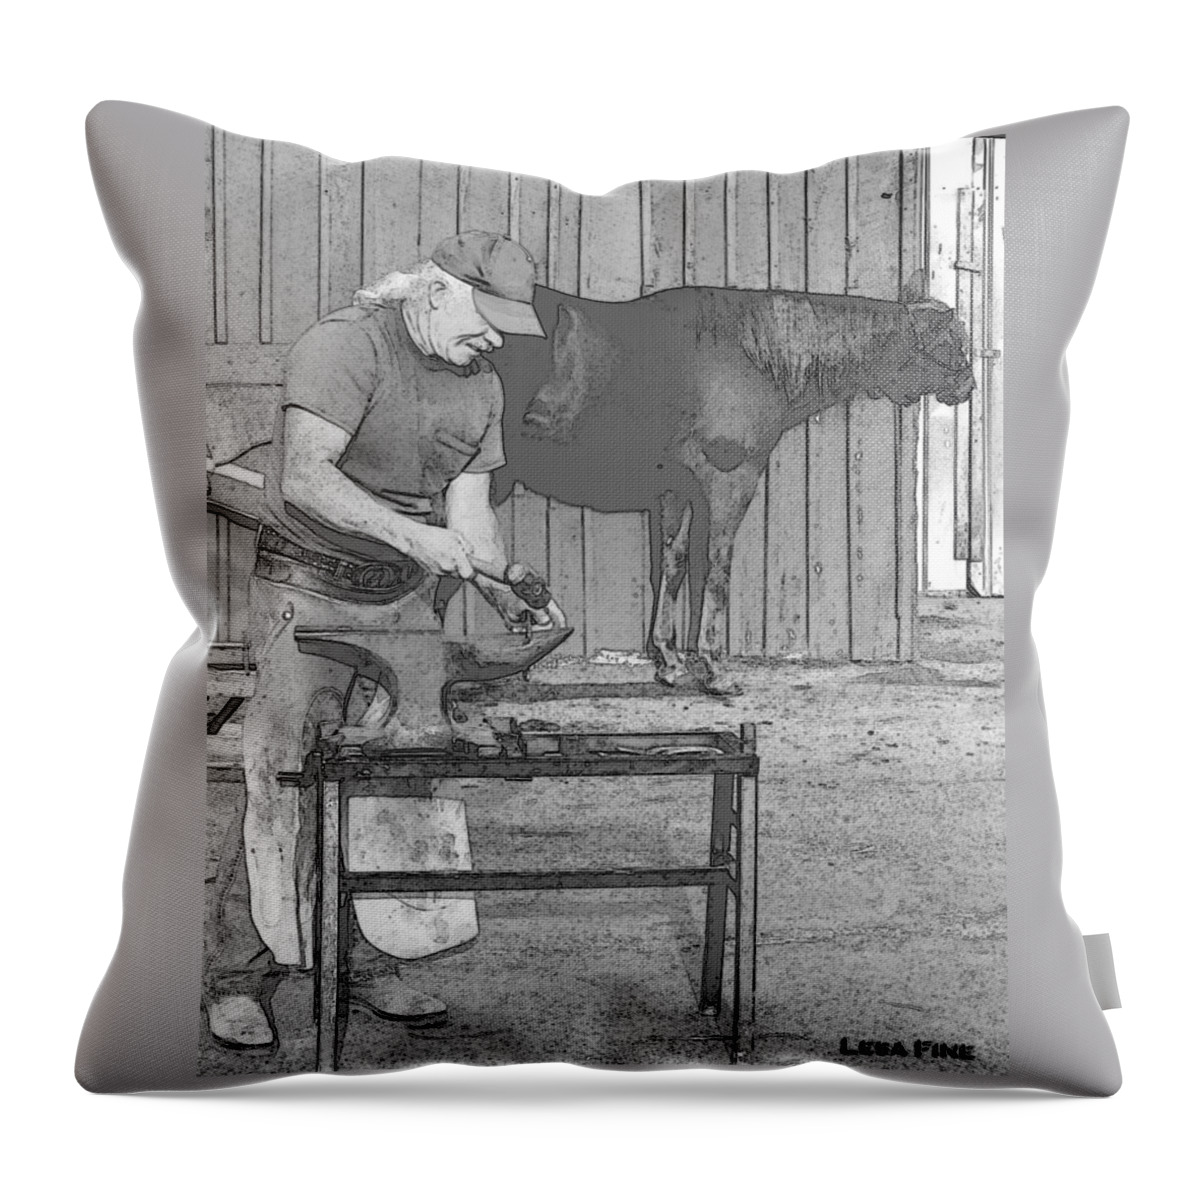 Man Throw Pillow featuring the mixed media BW Farrier Artwork by Lesa Fine